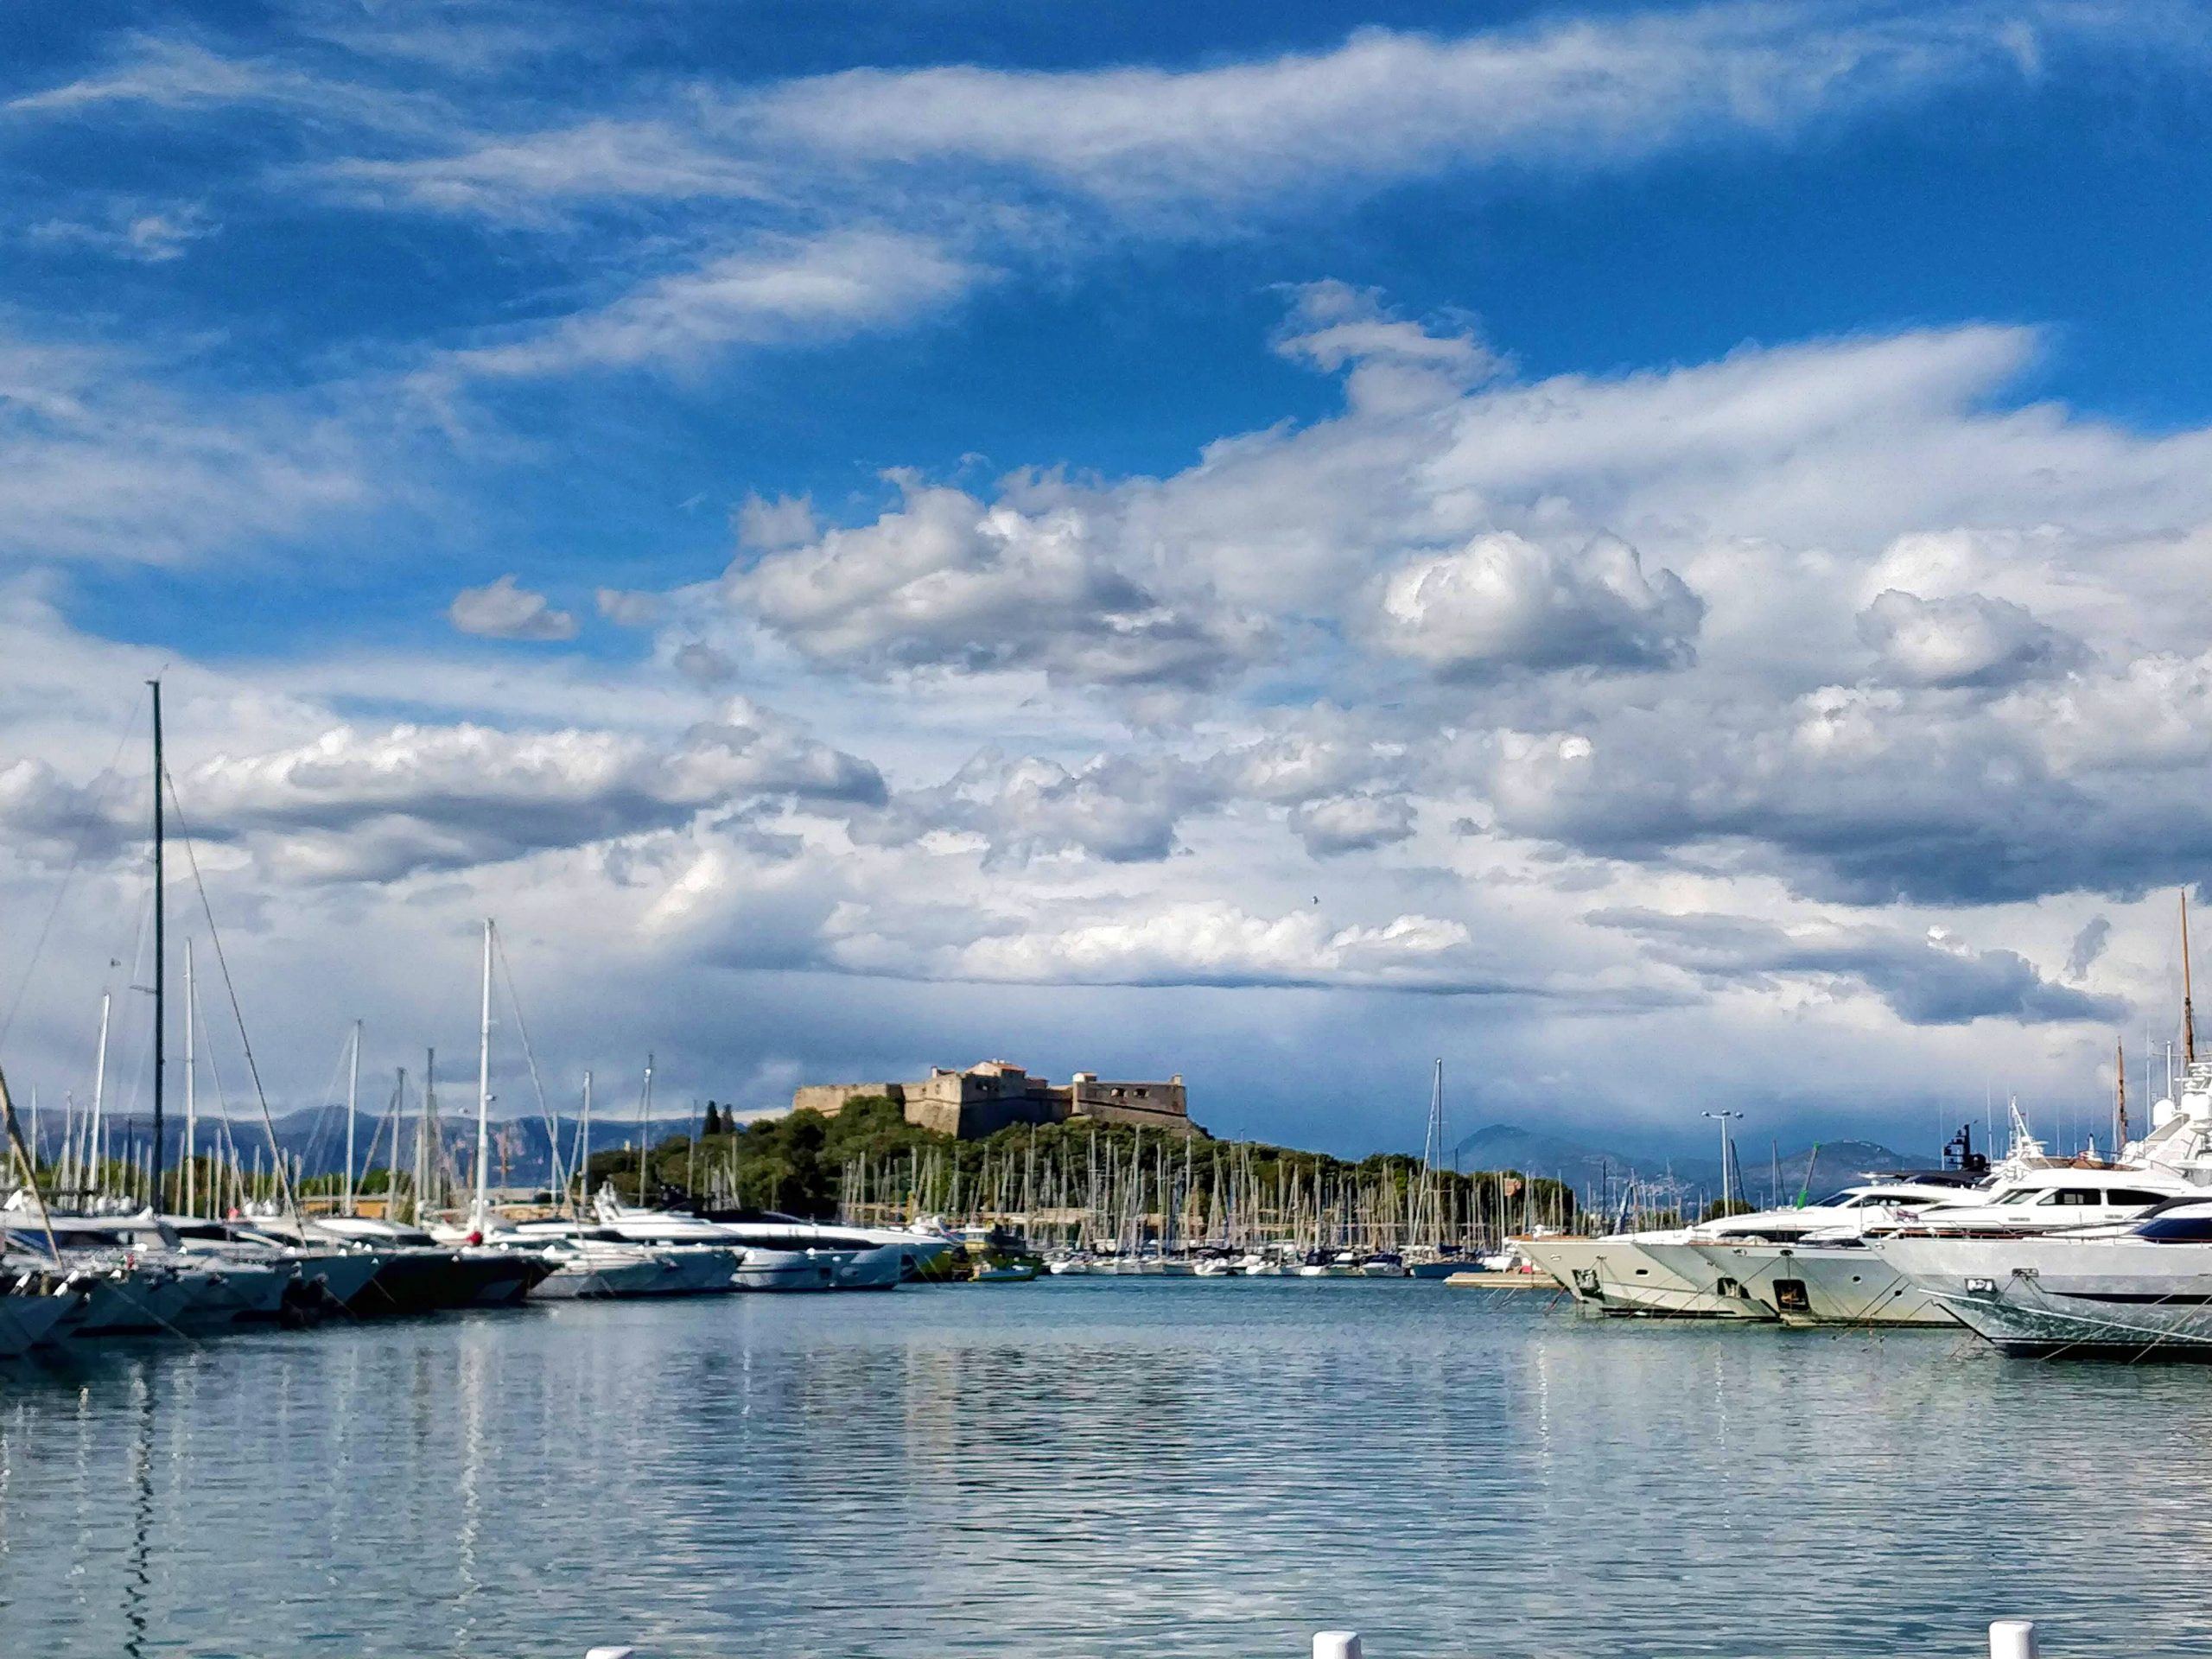 South Of France – Antibes Part 1/3